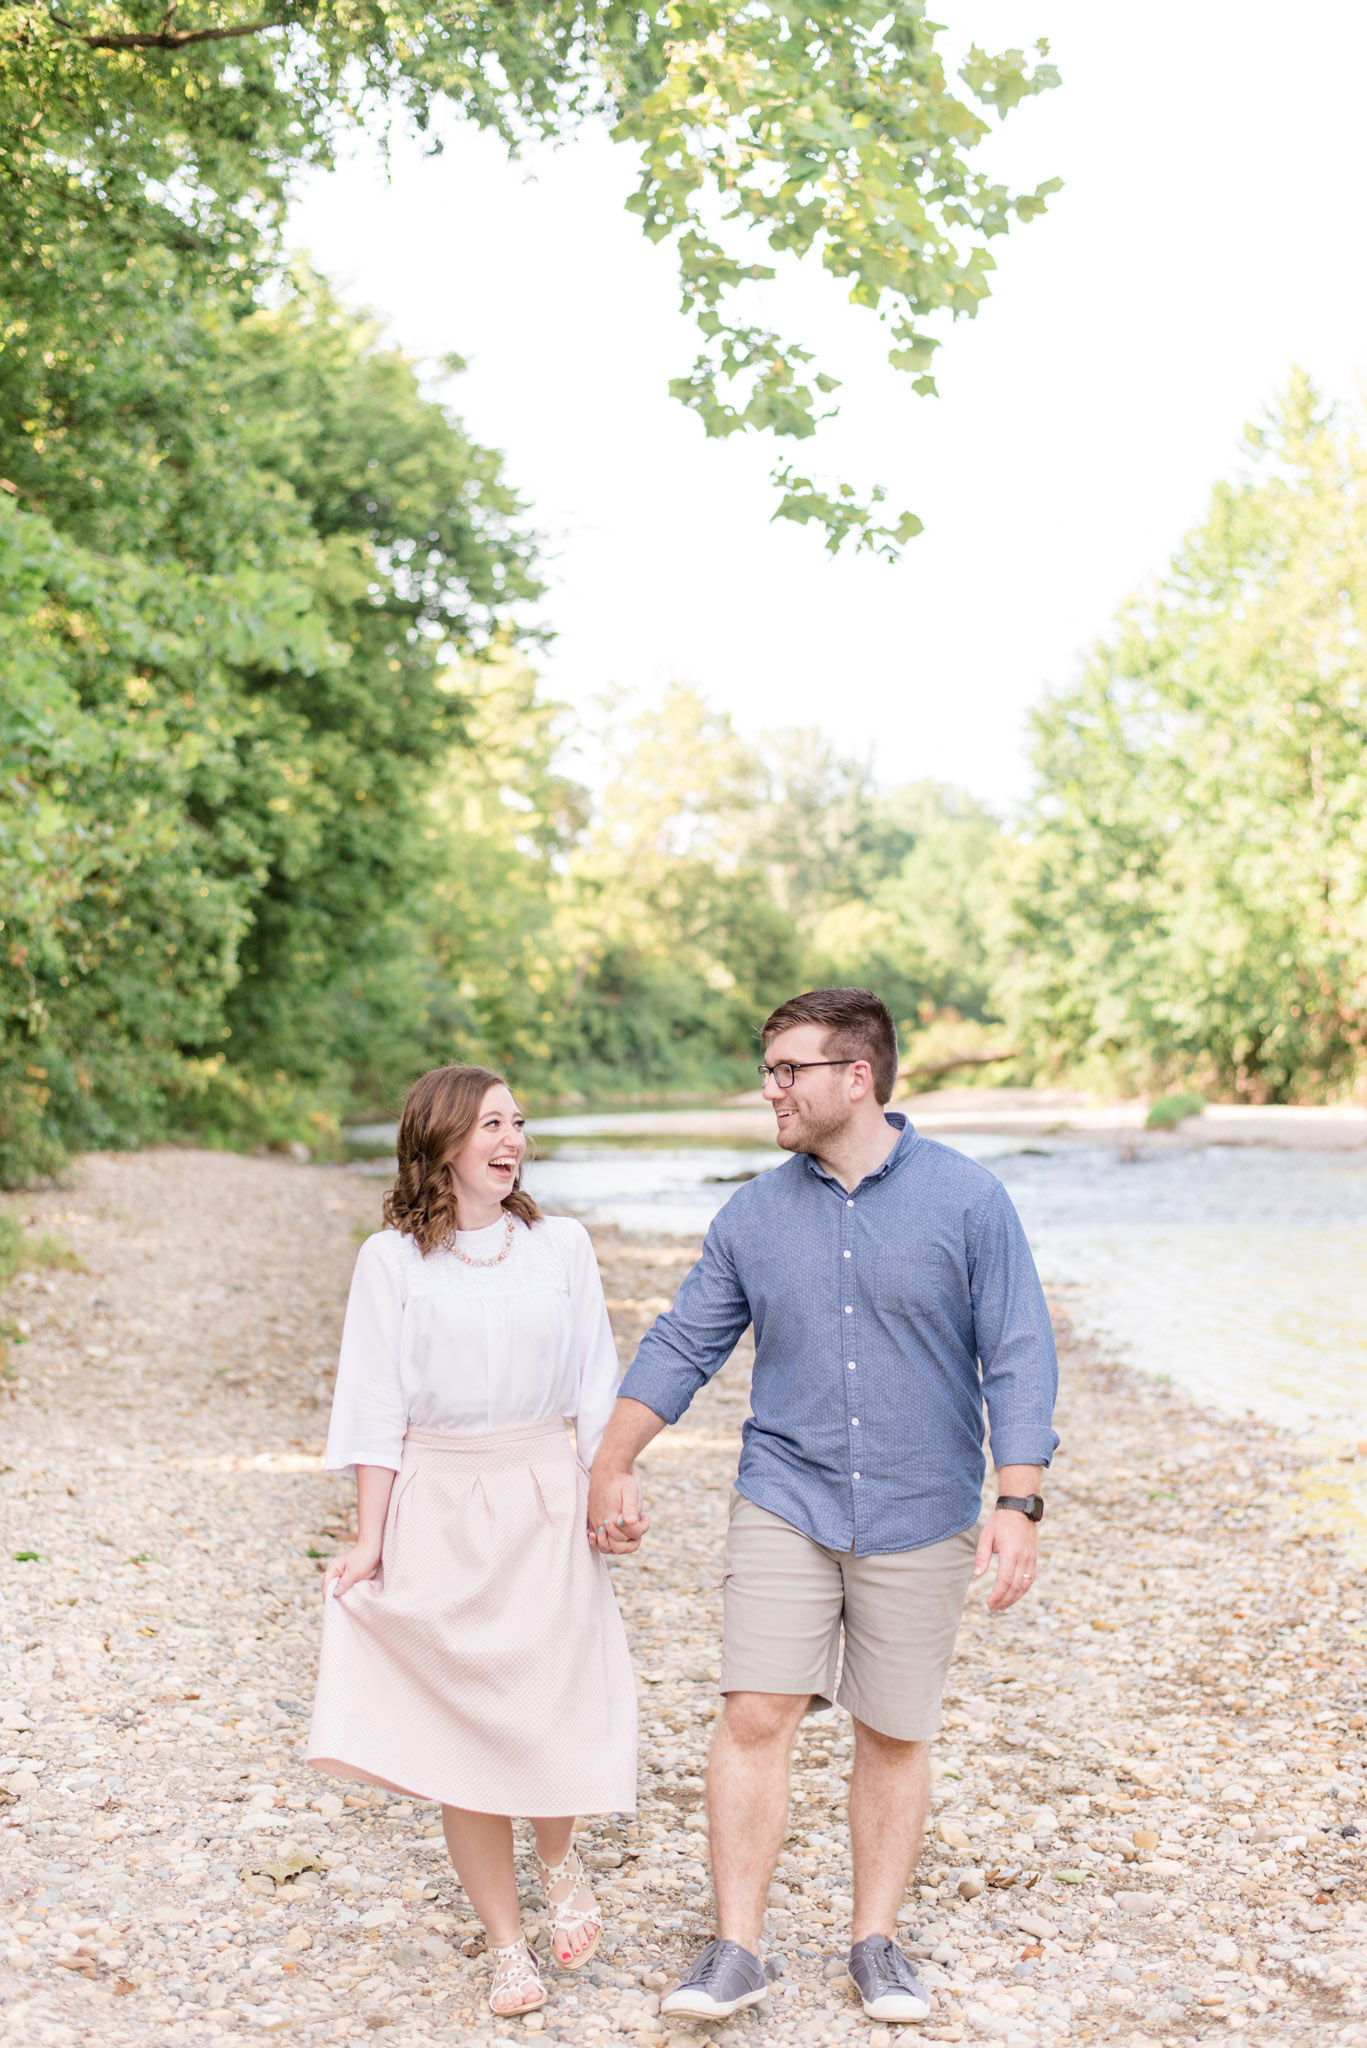 Husband and wife laugh while walking by rivers.